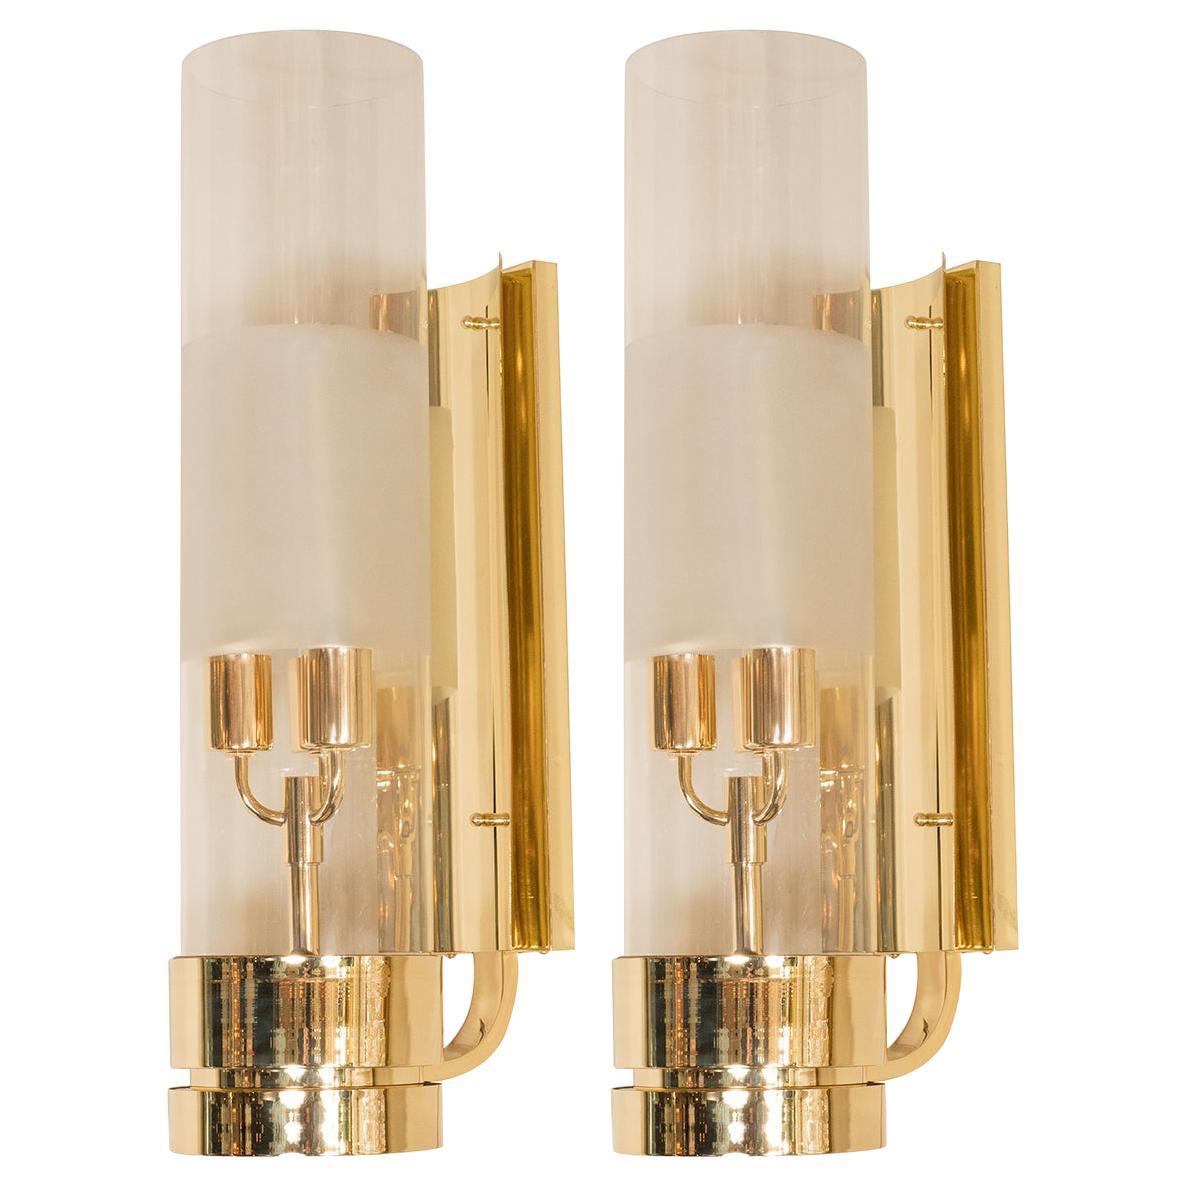 Pair of Brass Single Arm Sconces with Cylindrical Lucite Shades